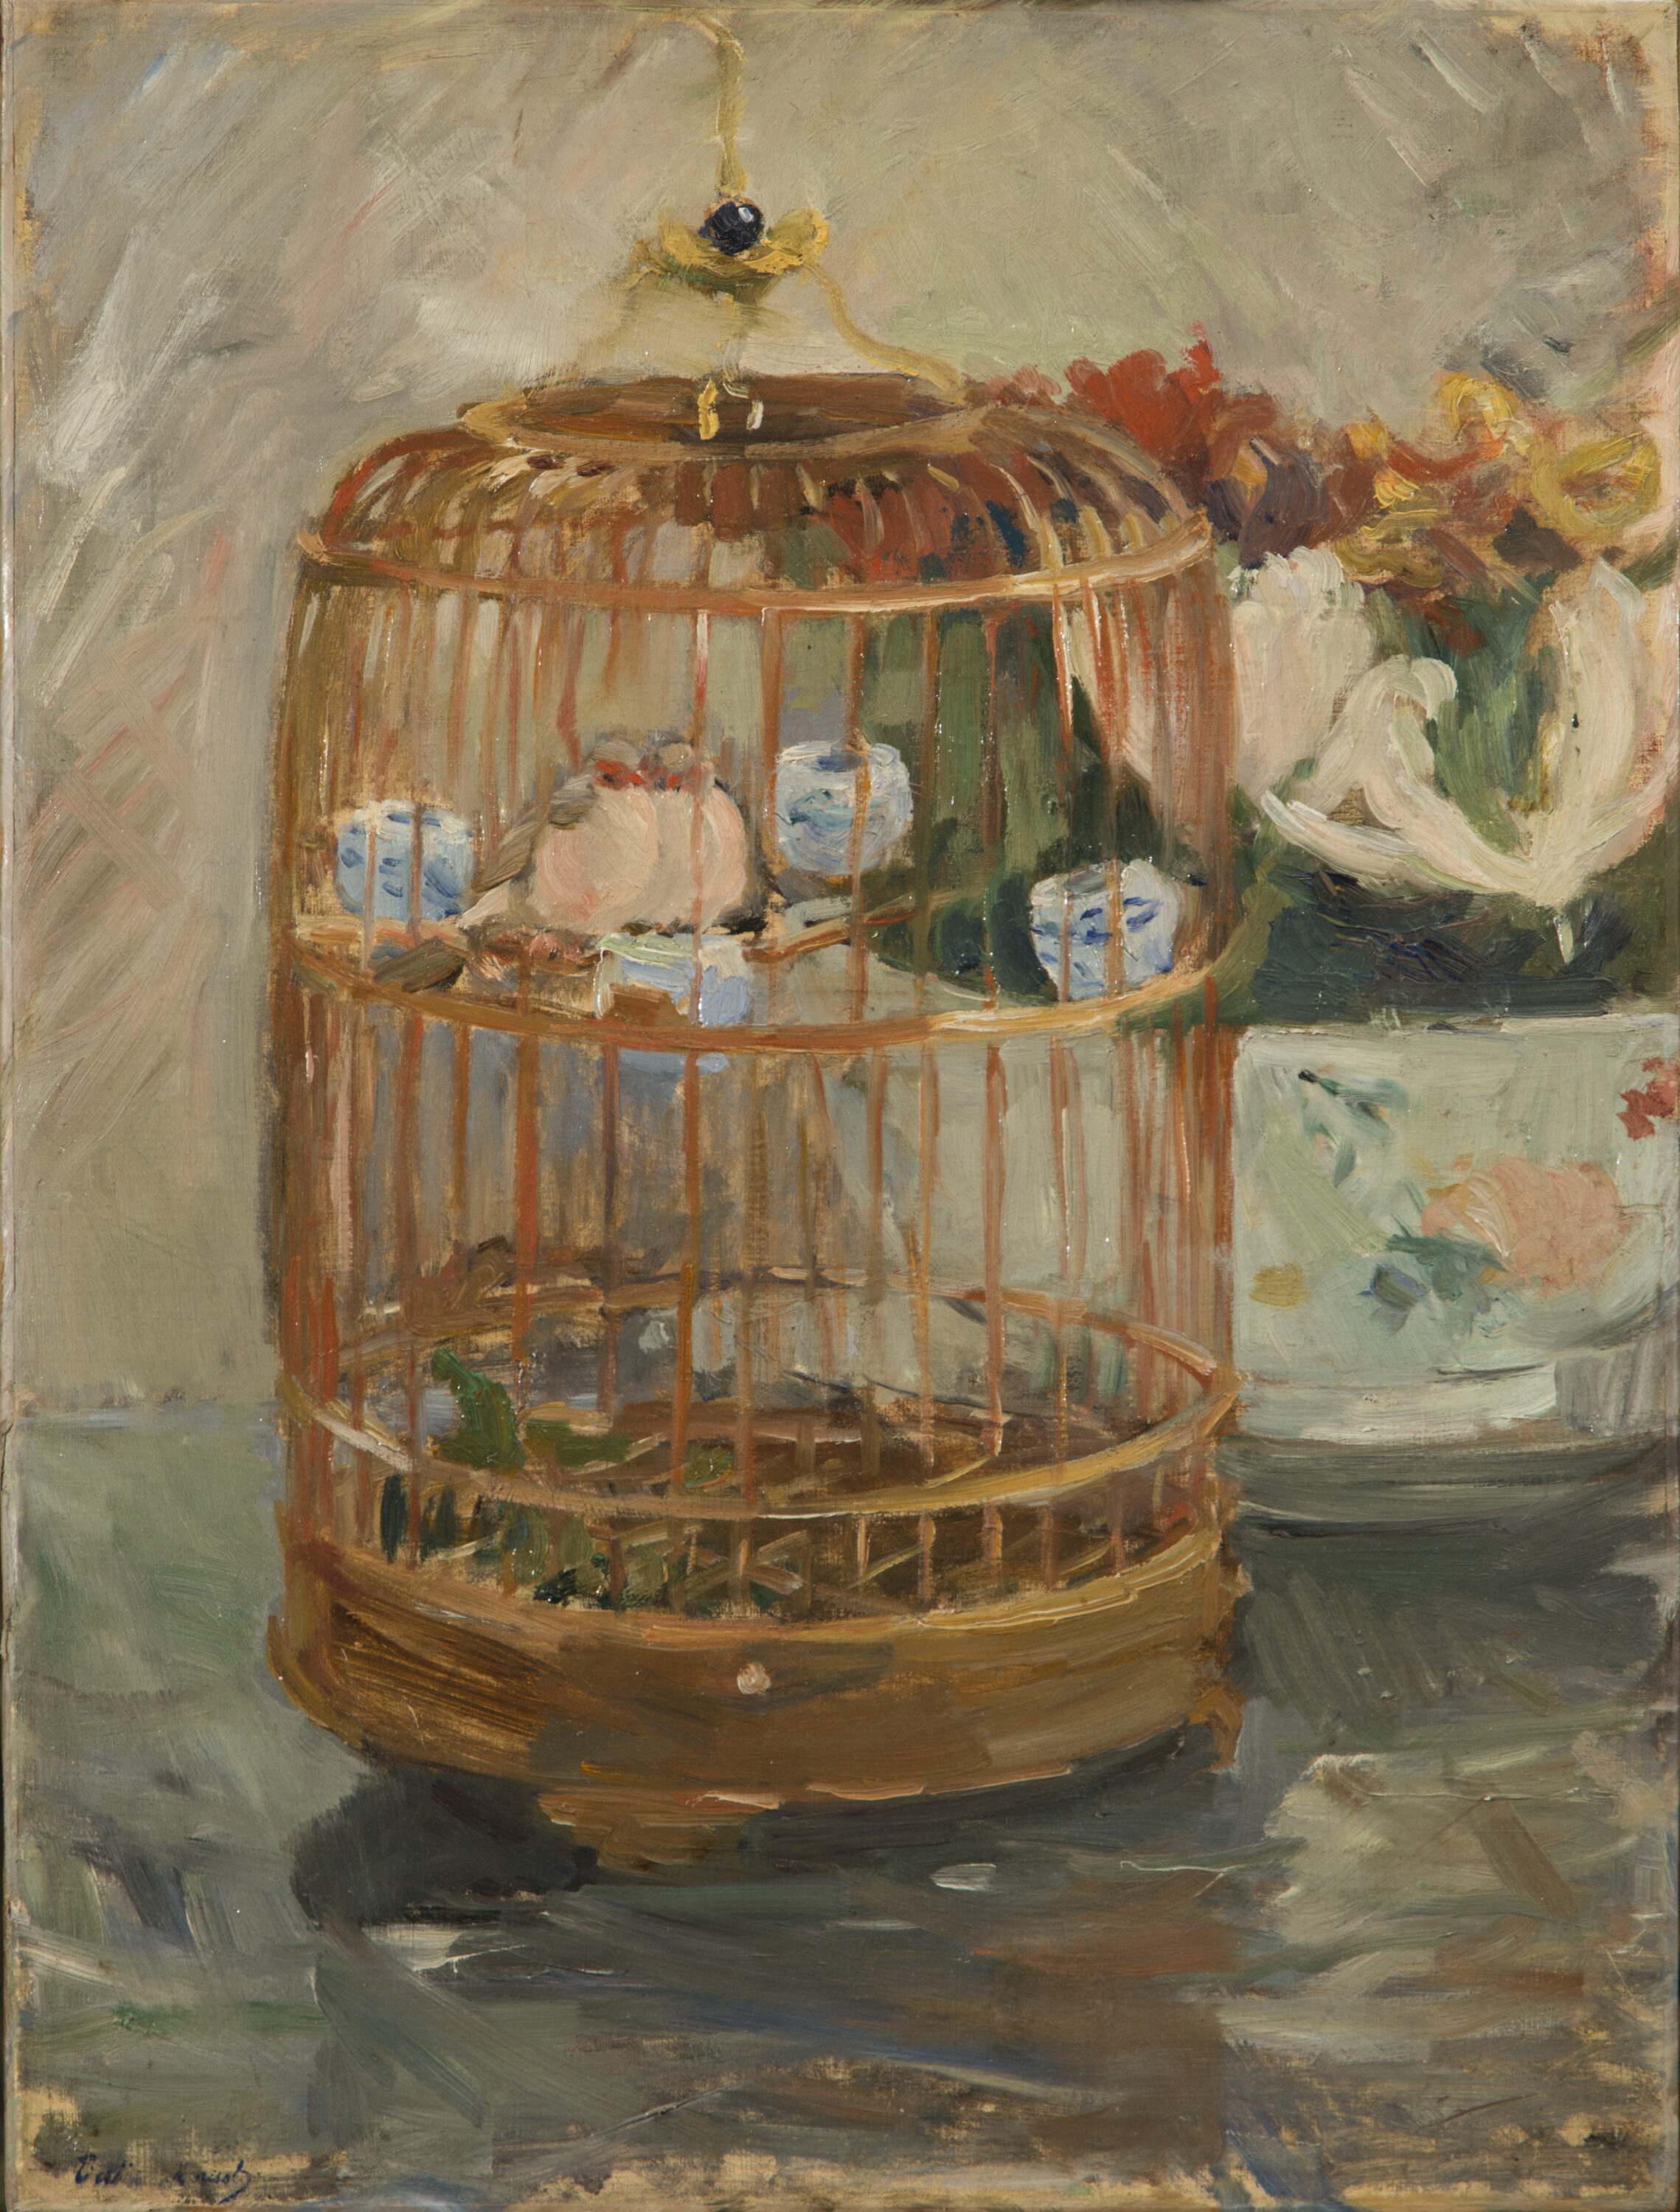 Rendered in loose, impressionistic brushstrokes in muted pastel tones, the still life painting depicts a brass birdcage with two small birds cuddled next to each other on a perch. The cage sits adjacent to and partially obscures a bowl of lush red, yellow, and white flowers.